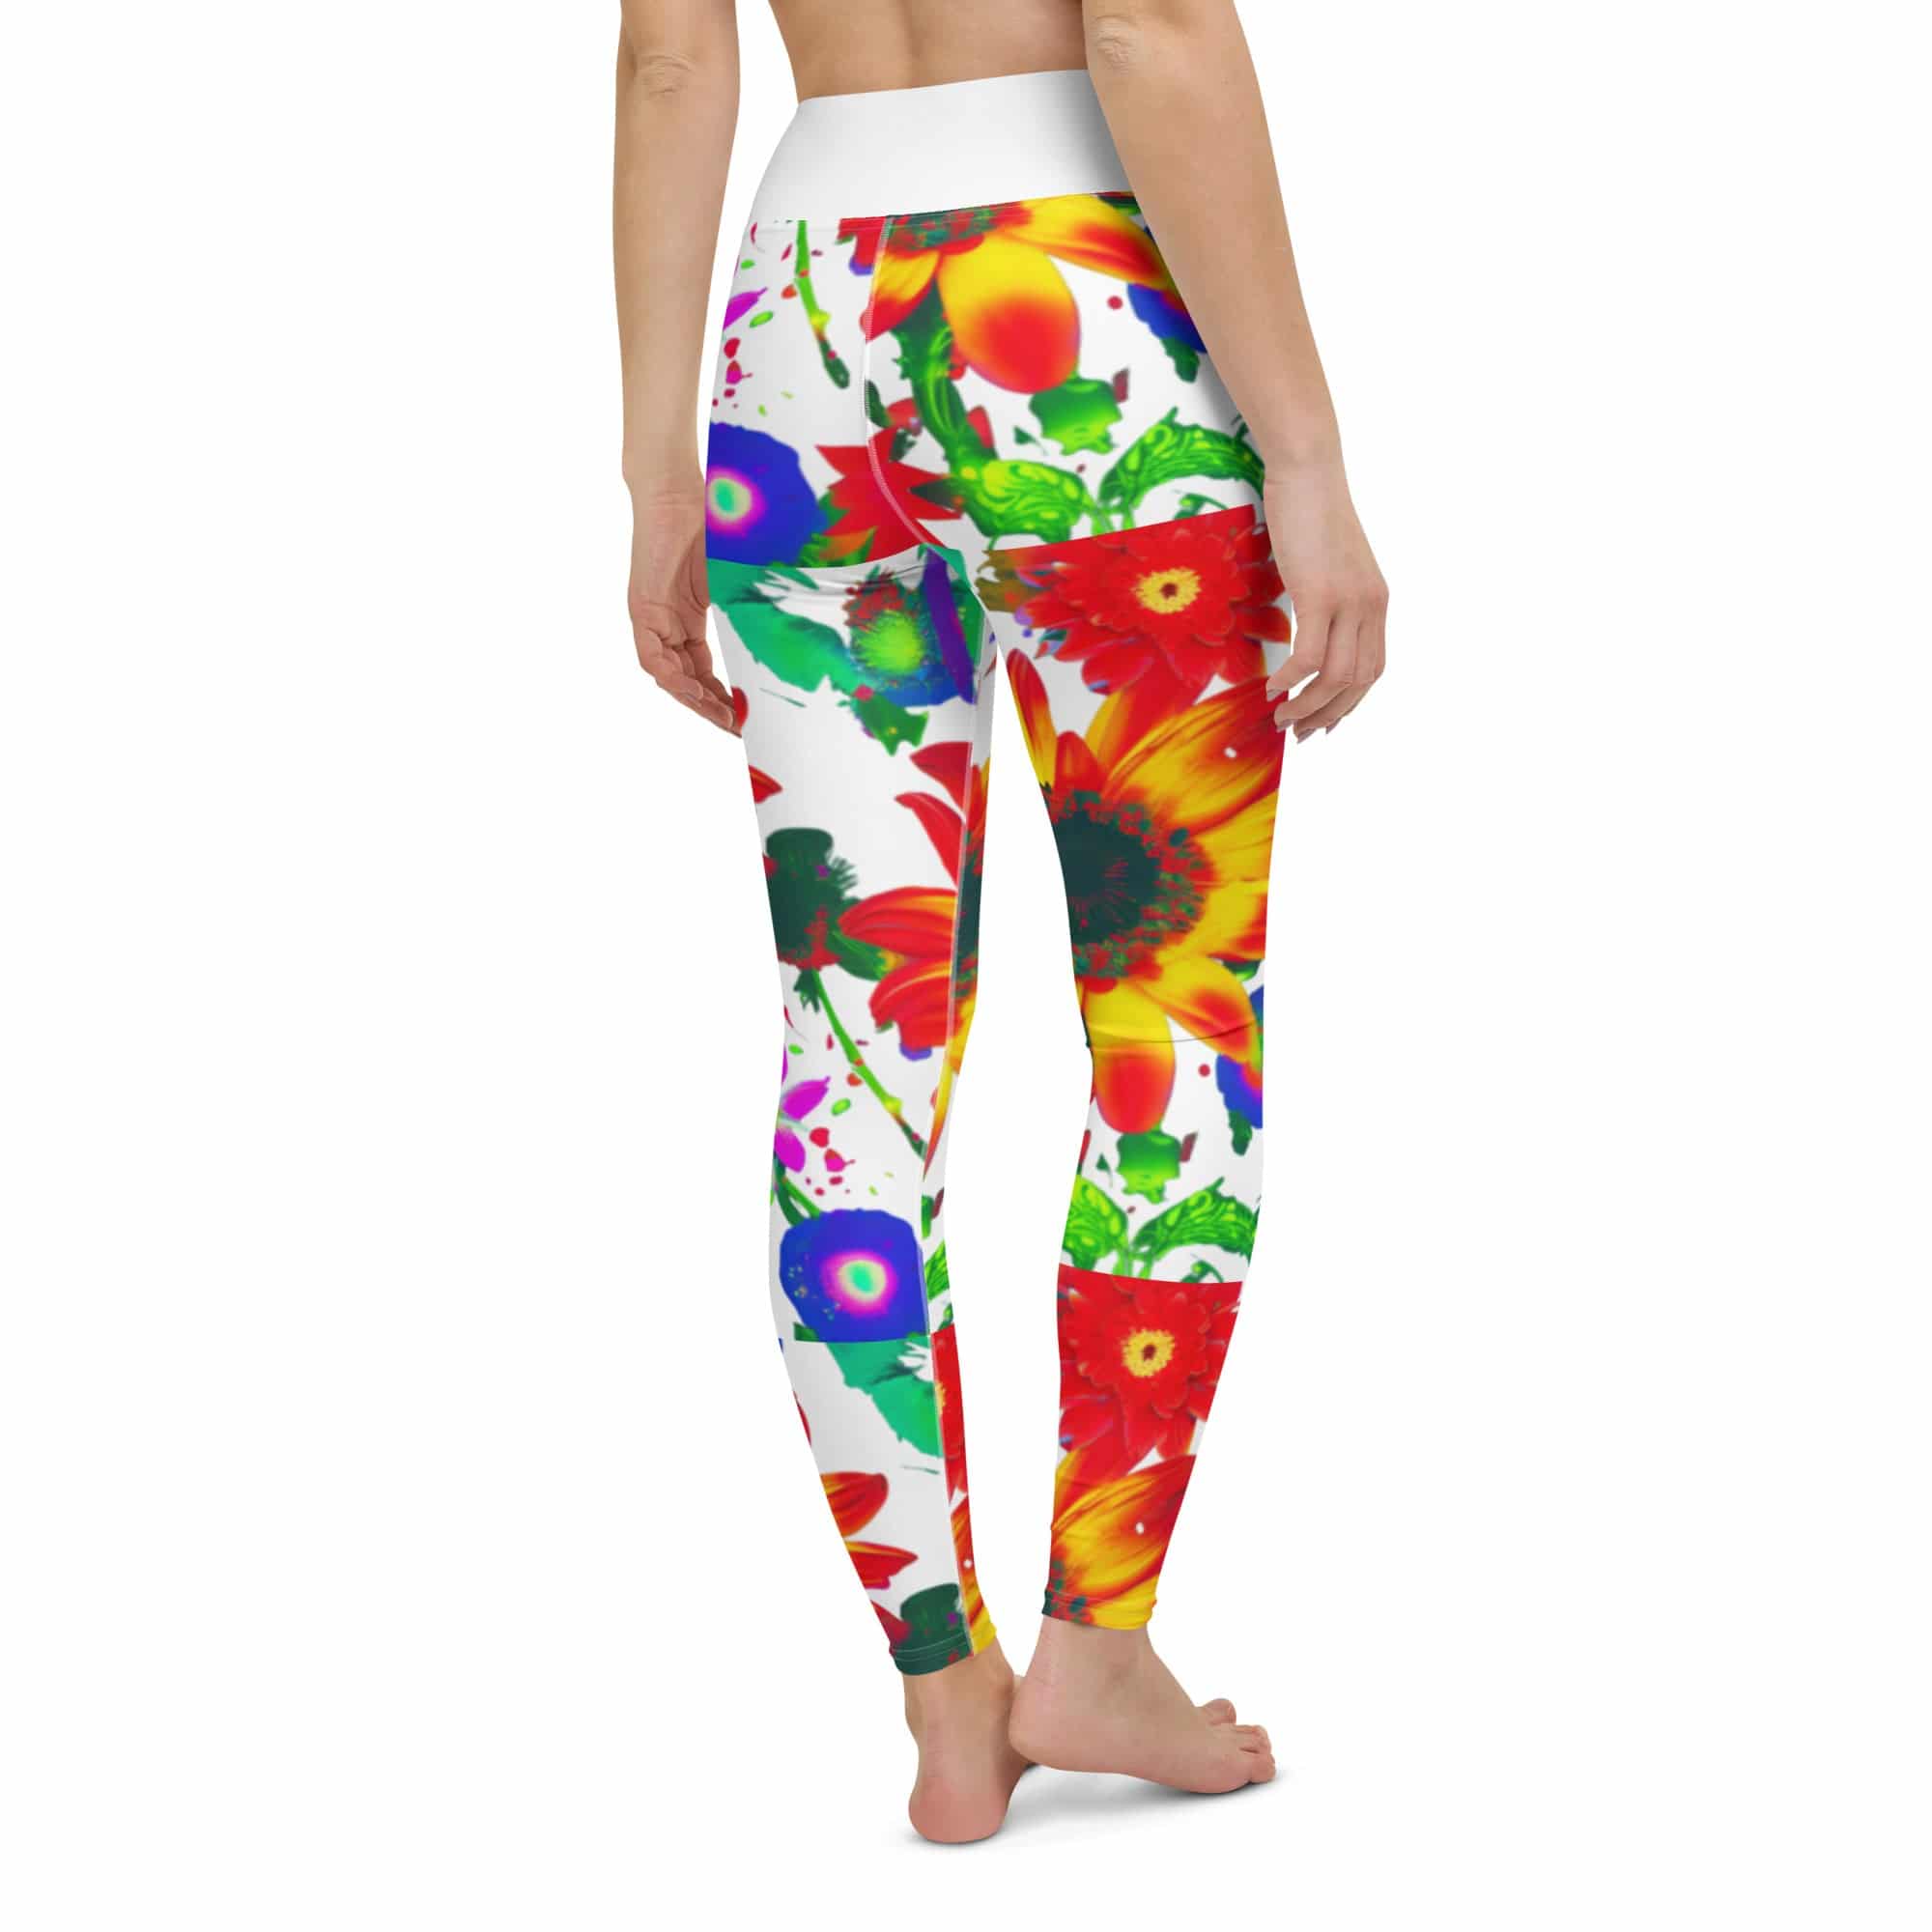 Enchanting Yoga Leggings - Let Your Body Feel the Magic - Soft, Tailored and Whimsical - Guy Christopher